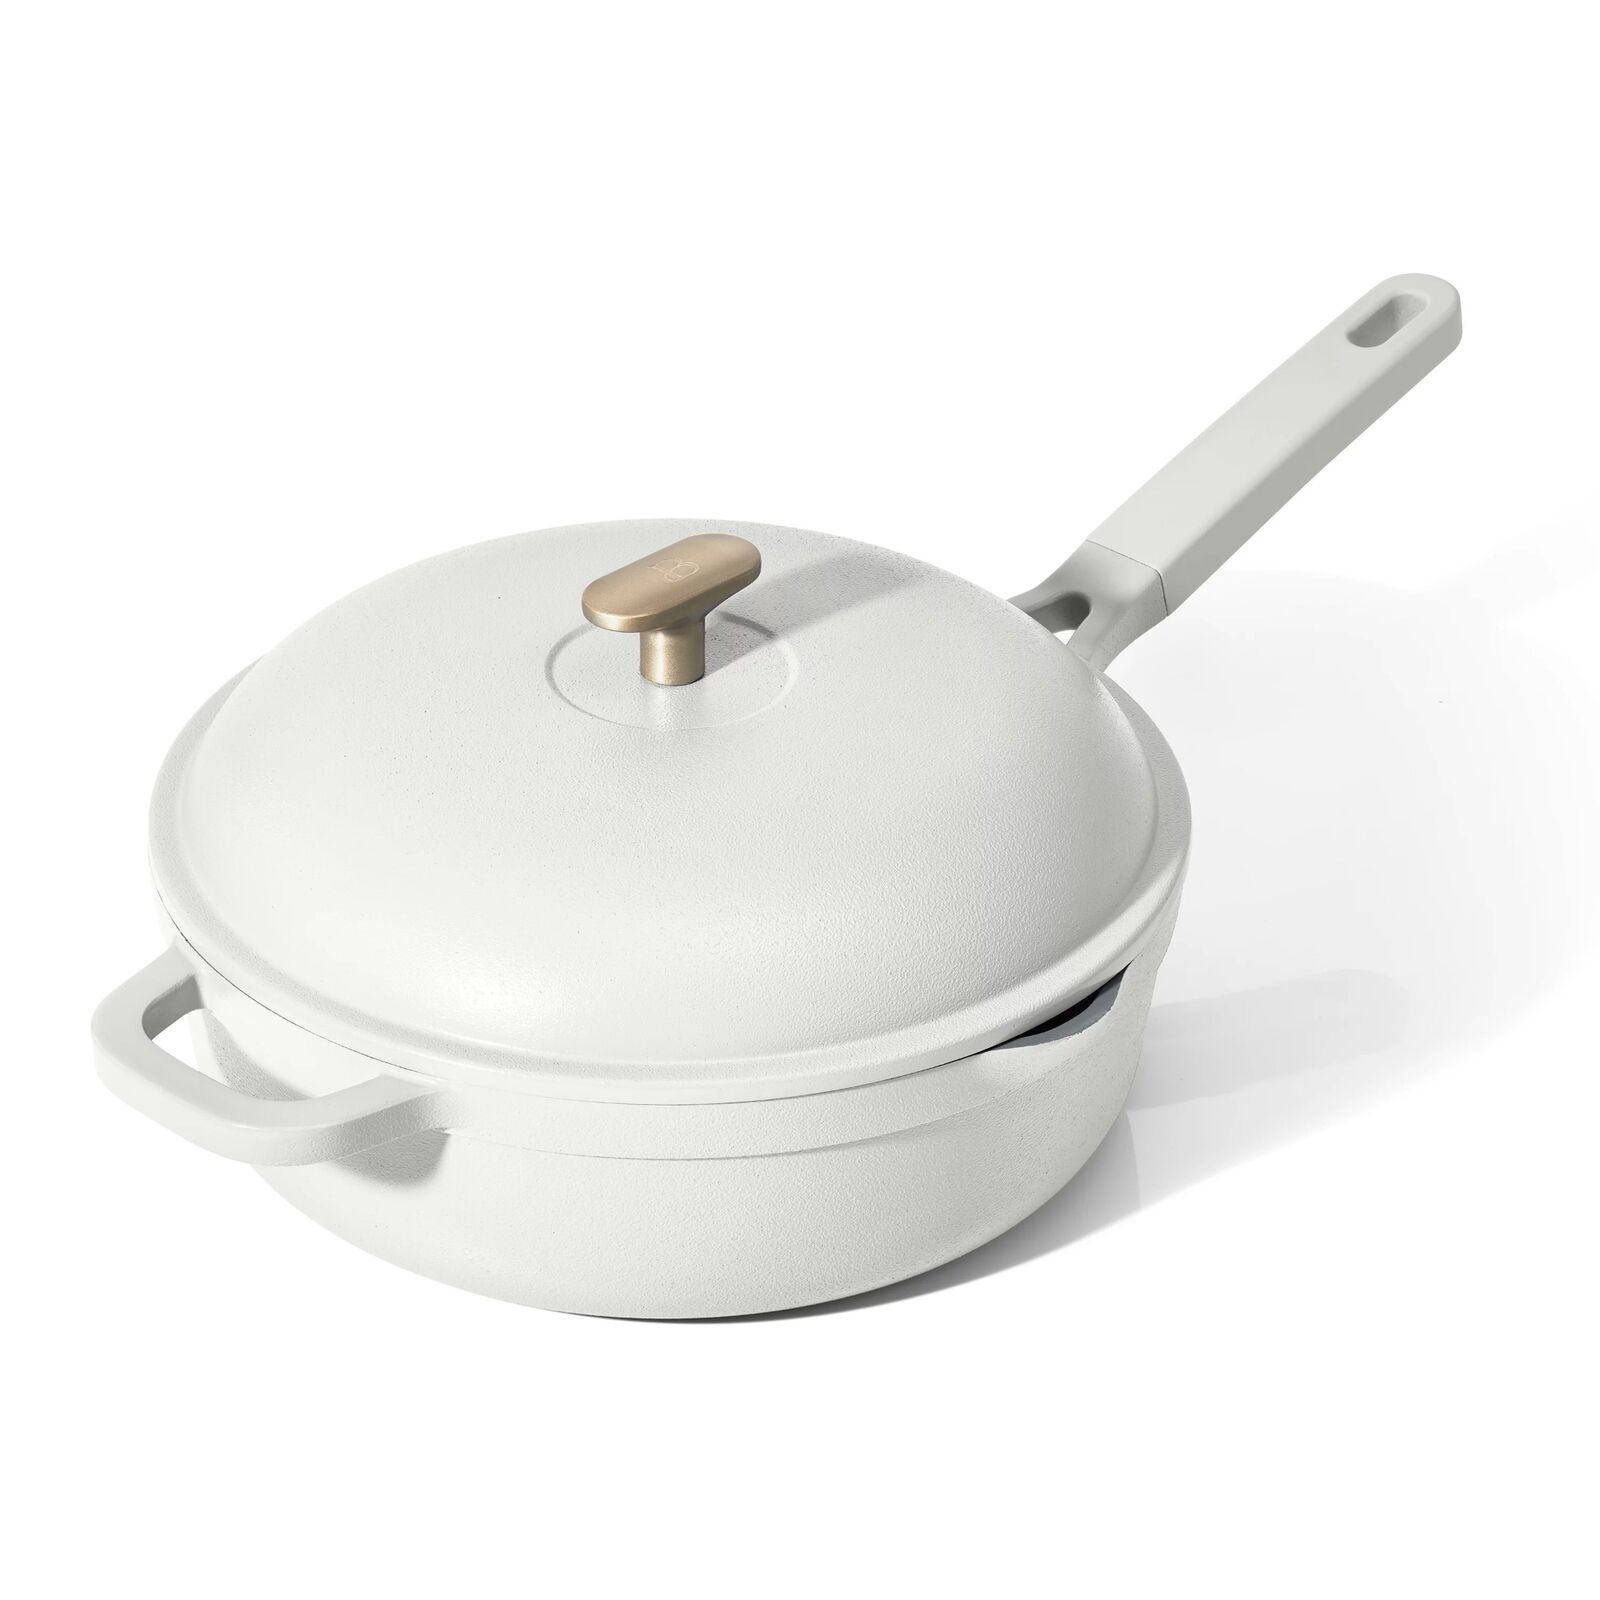  Multifunctional 4 QT Hero Pan with Steam Liner 3 Piece Set White Frosting  